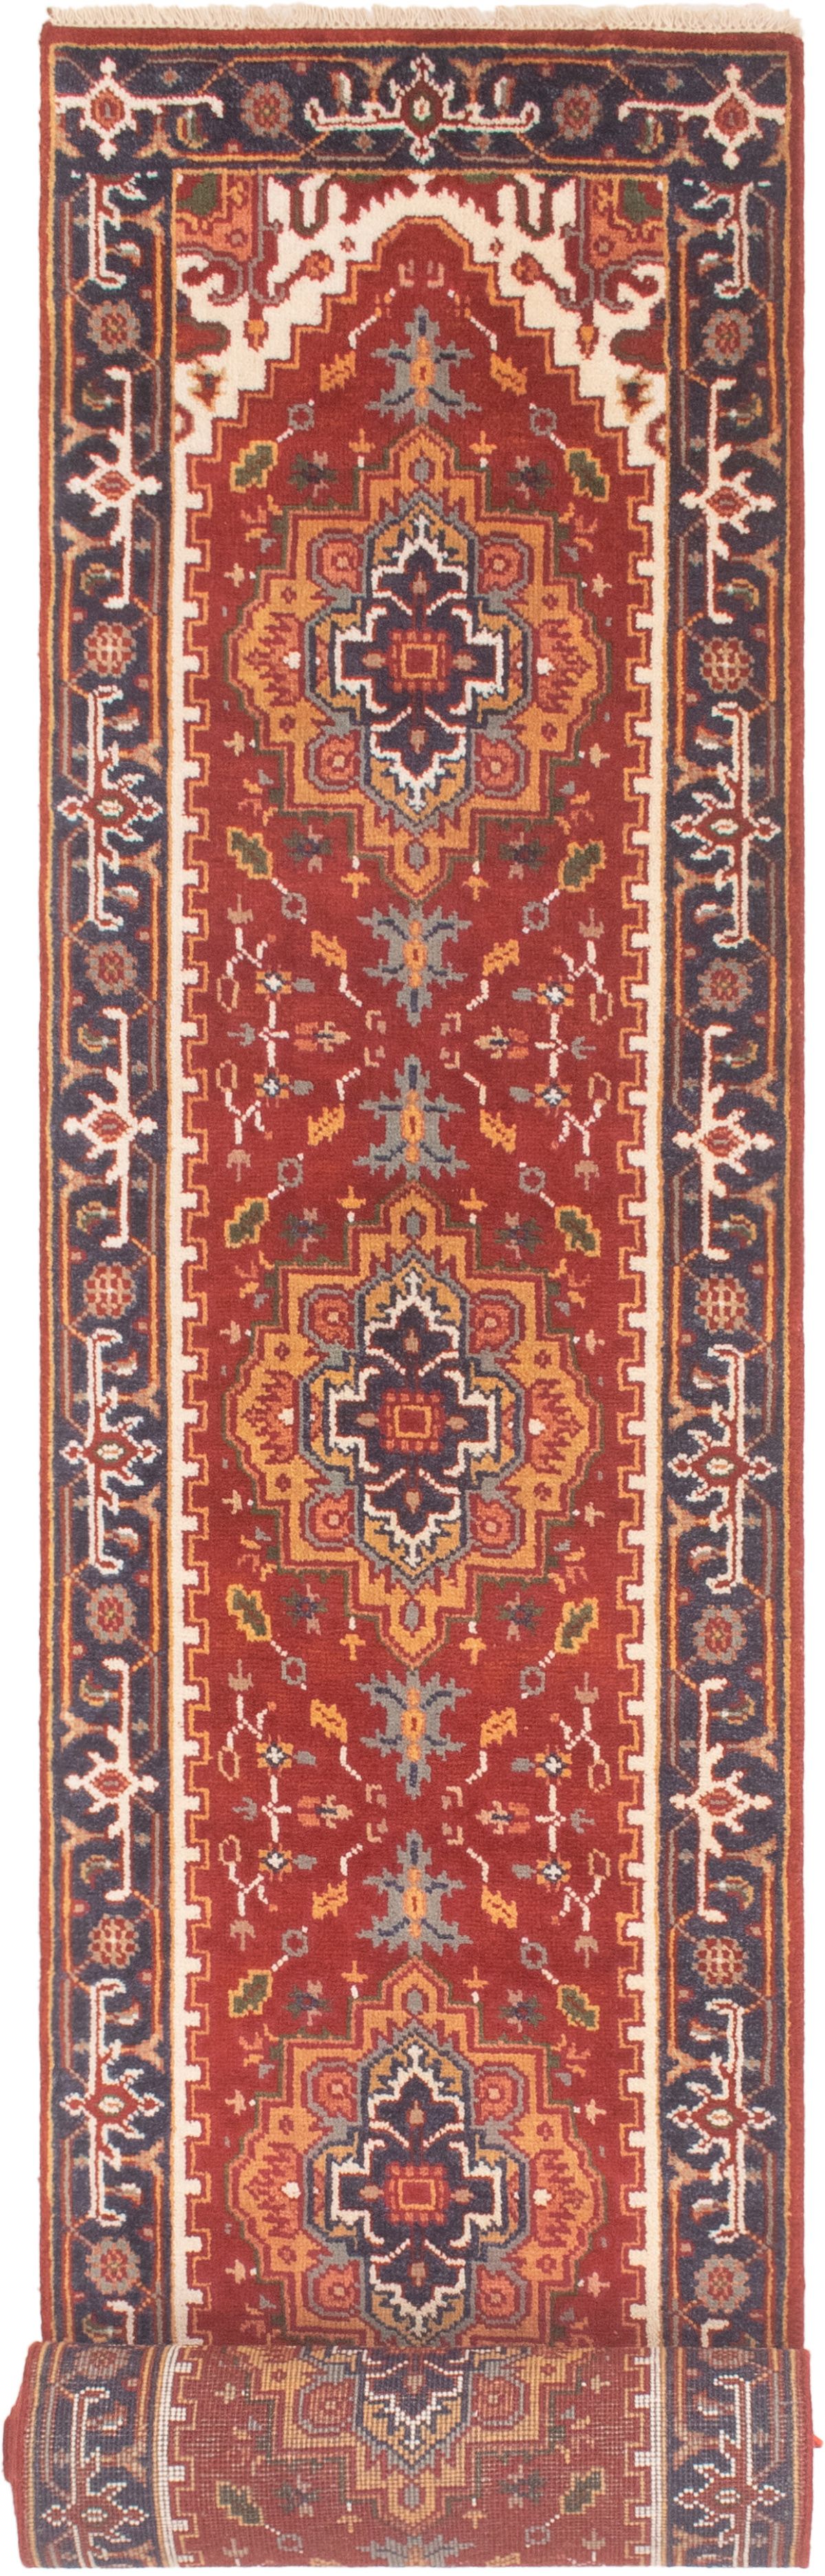 Hand-knotted Serapi Heritage Dark Copper Wool Rug 2'6" x 19'8"  Size: 2'6" x 19'8"  